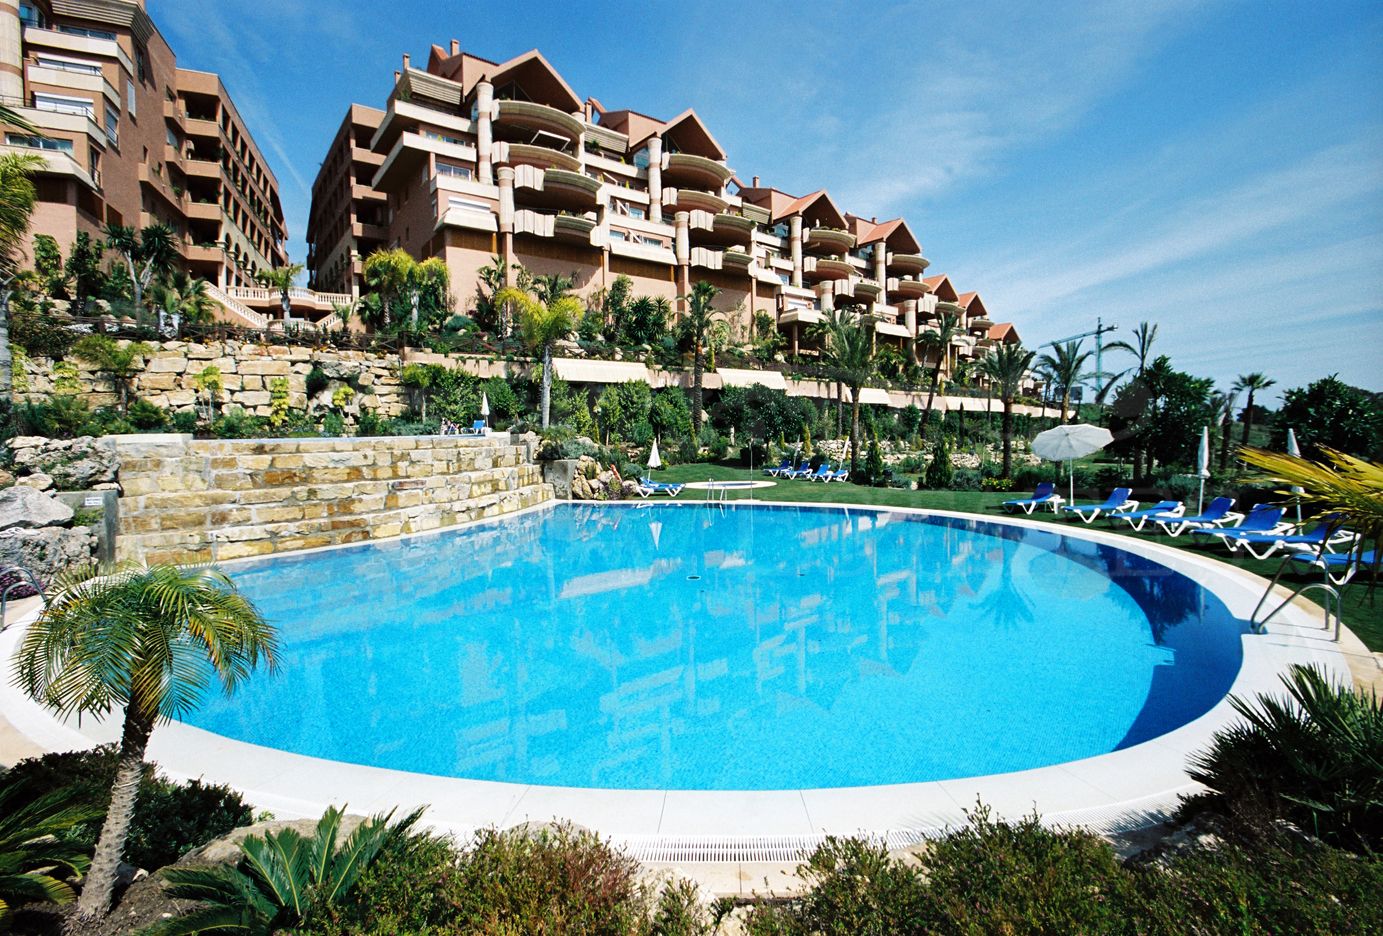 Apartment in Magna Marbella with golf membership included in the price